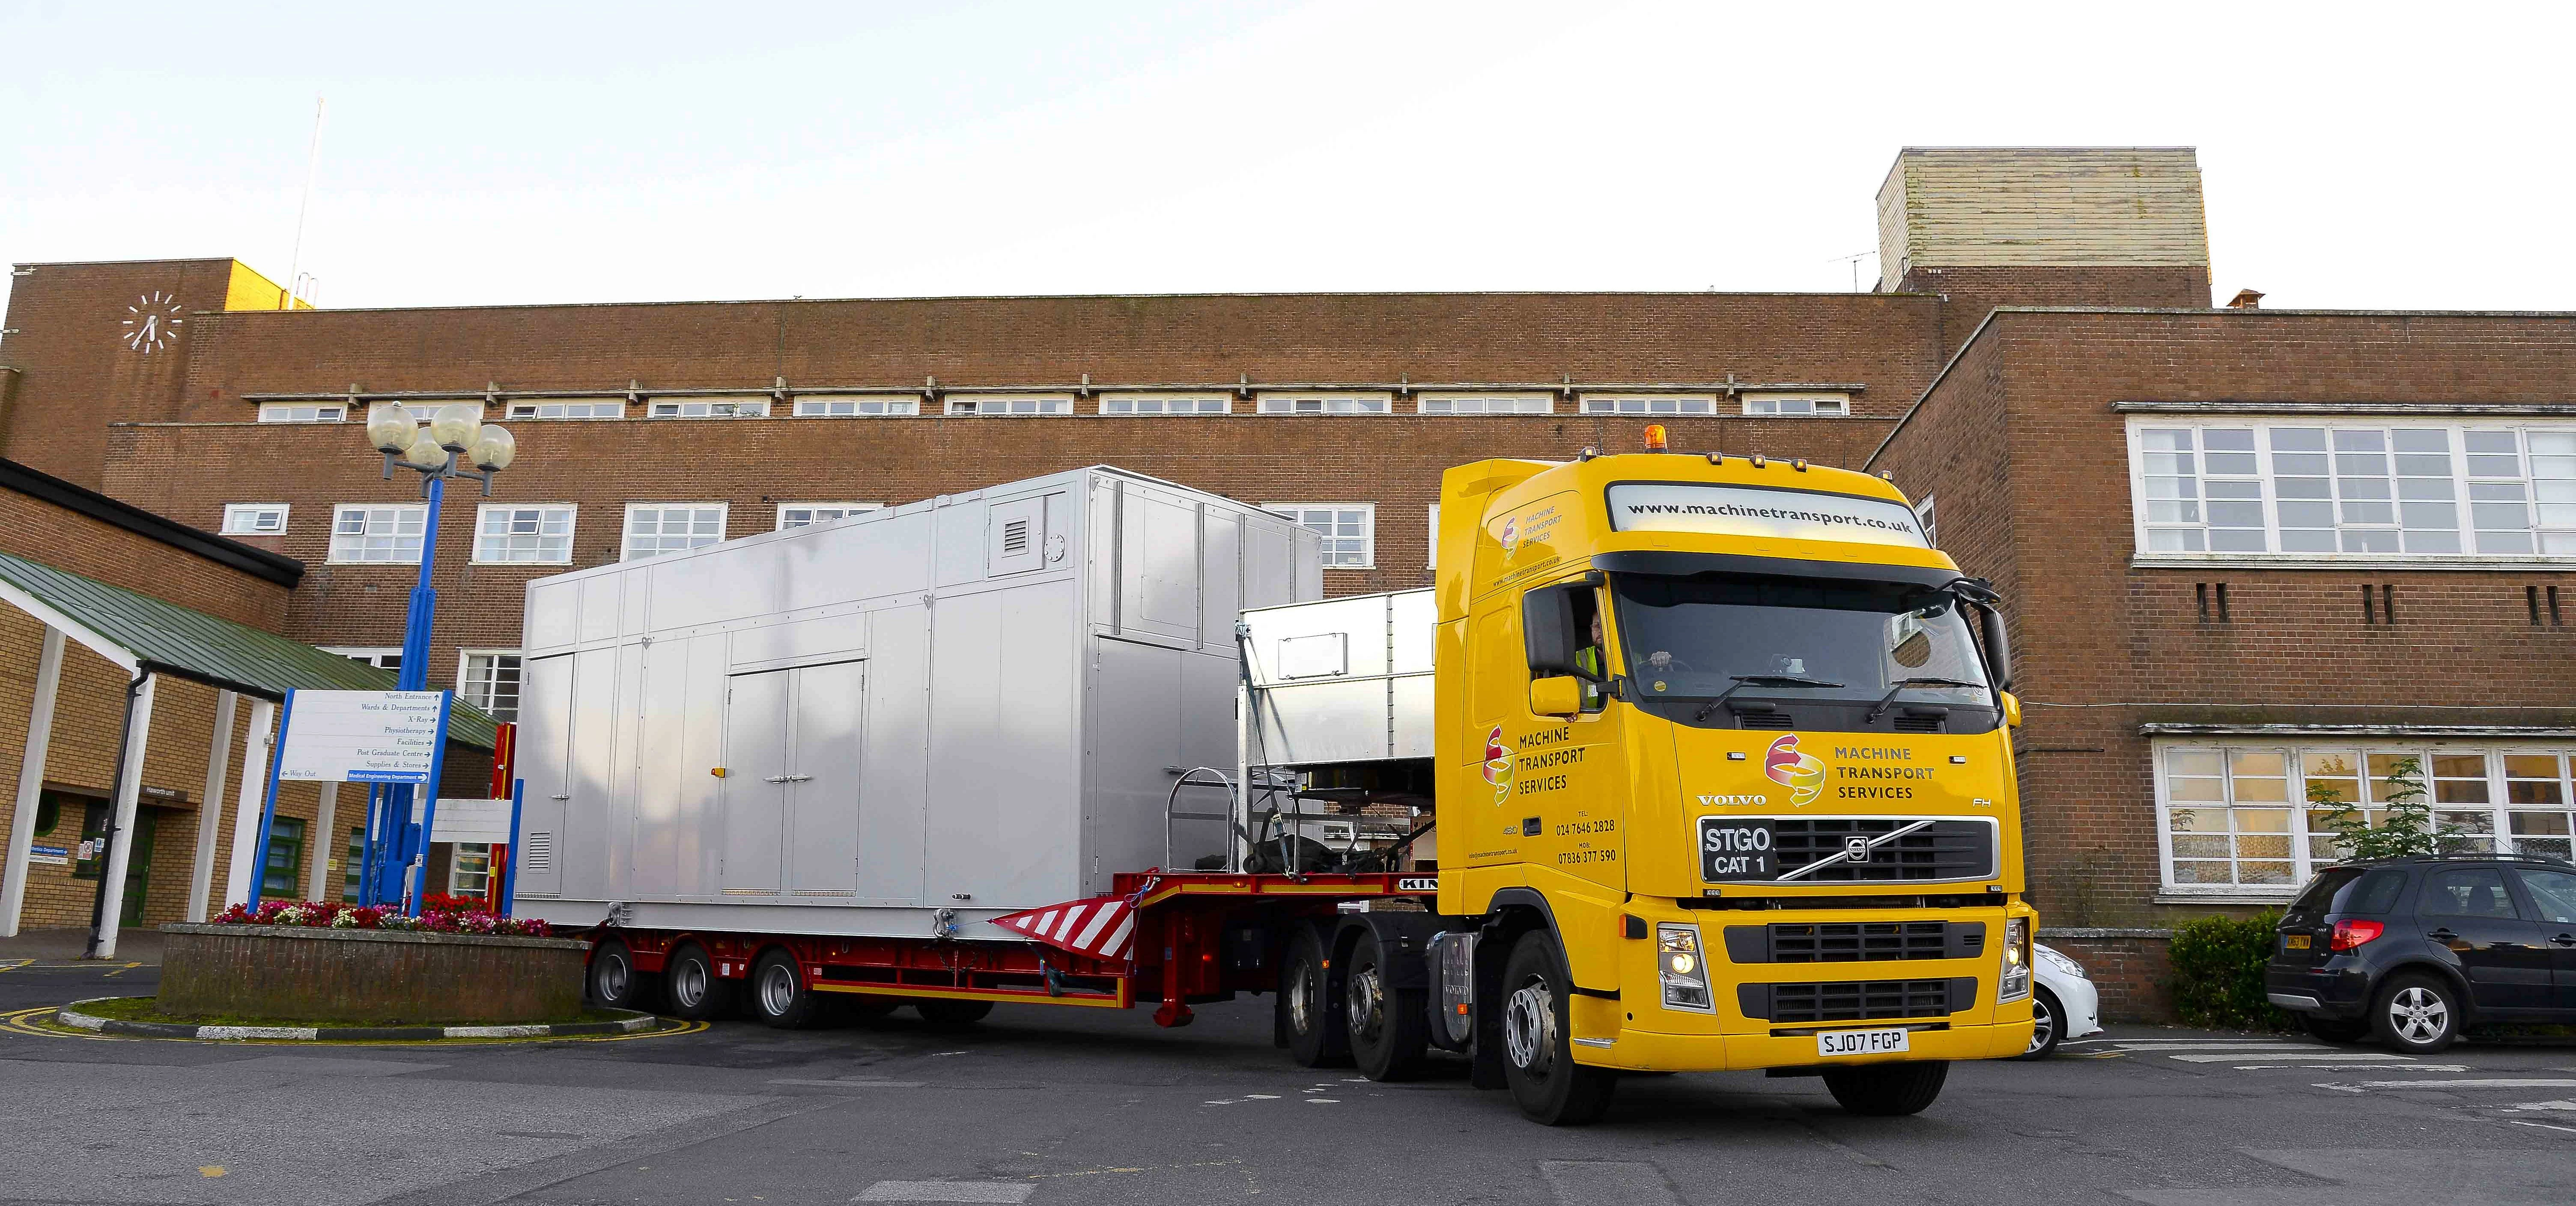 The 28-tonnes CHP Engine arriving at the hospital